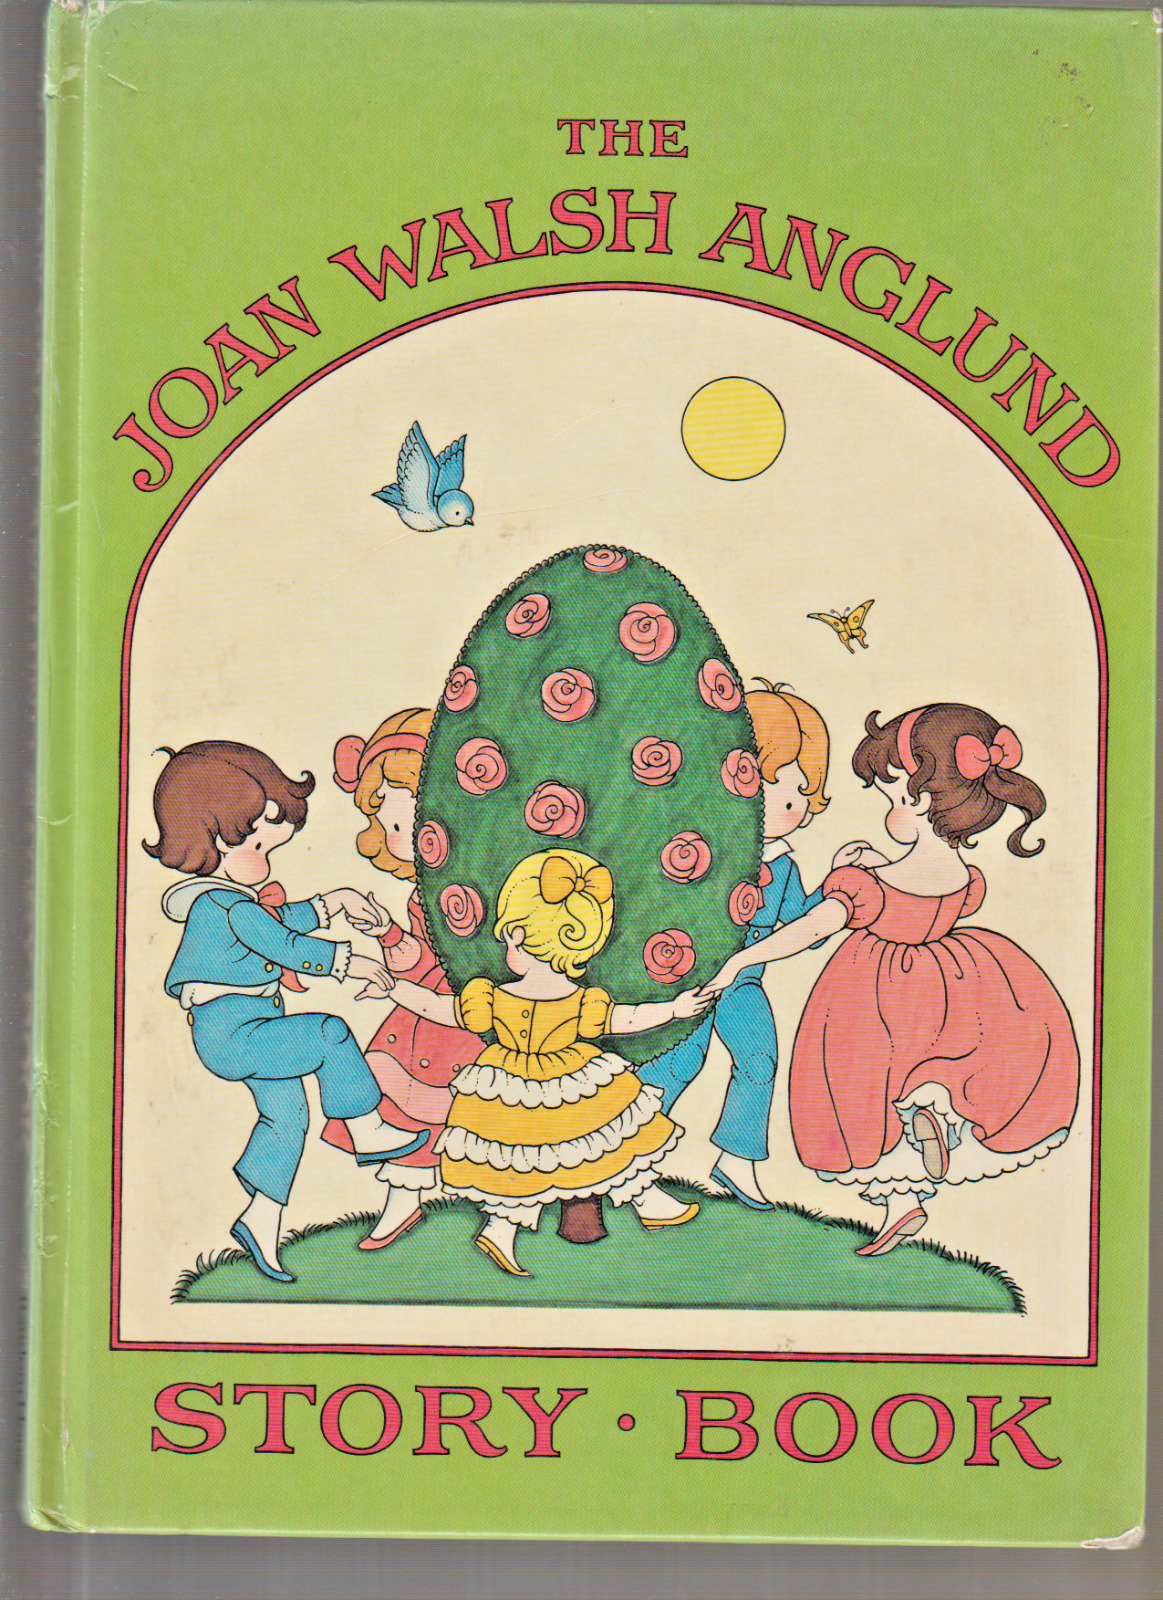 THE JOAN WALSH ANGLUND STORY BOOK ~ Large Vintage Glossy Hardcover Book, vg